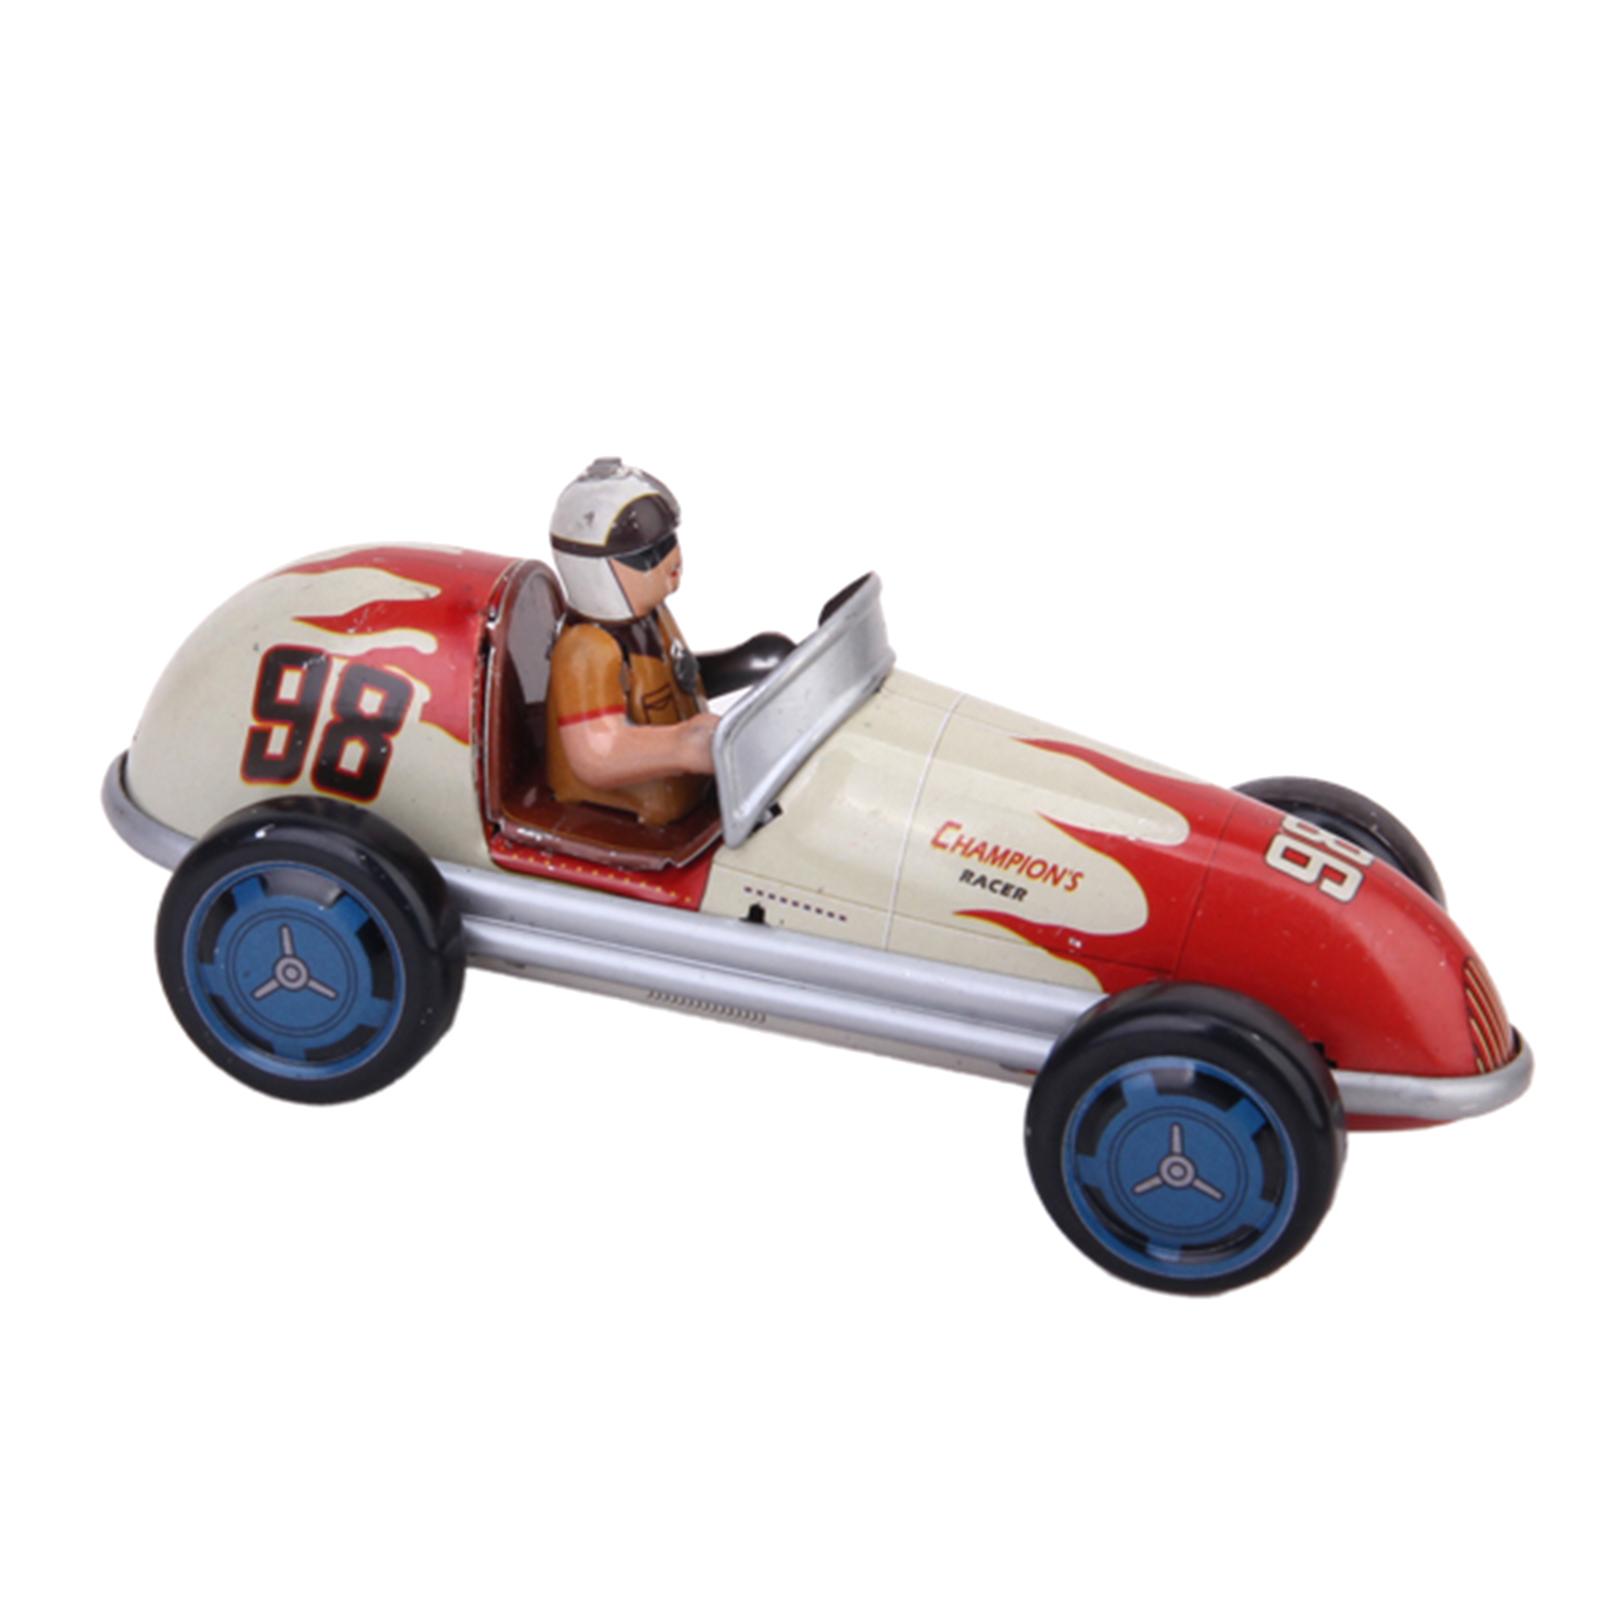 Wind-Up Retro Racing Car Model Toy Collectible Gift